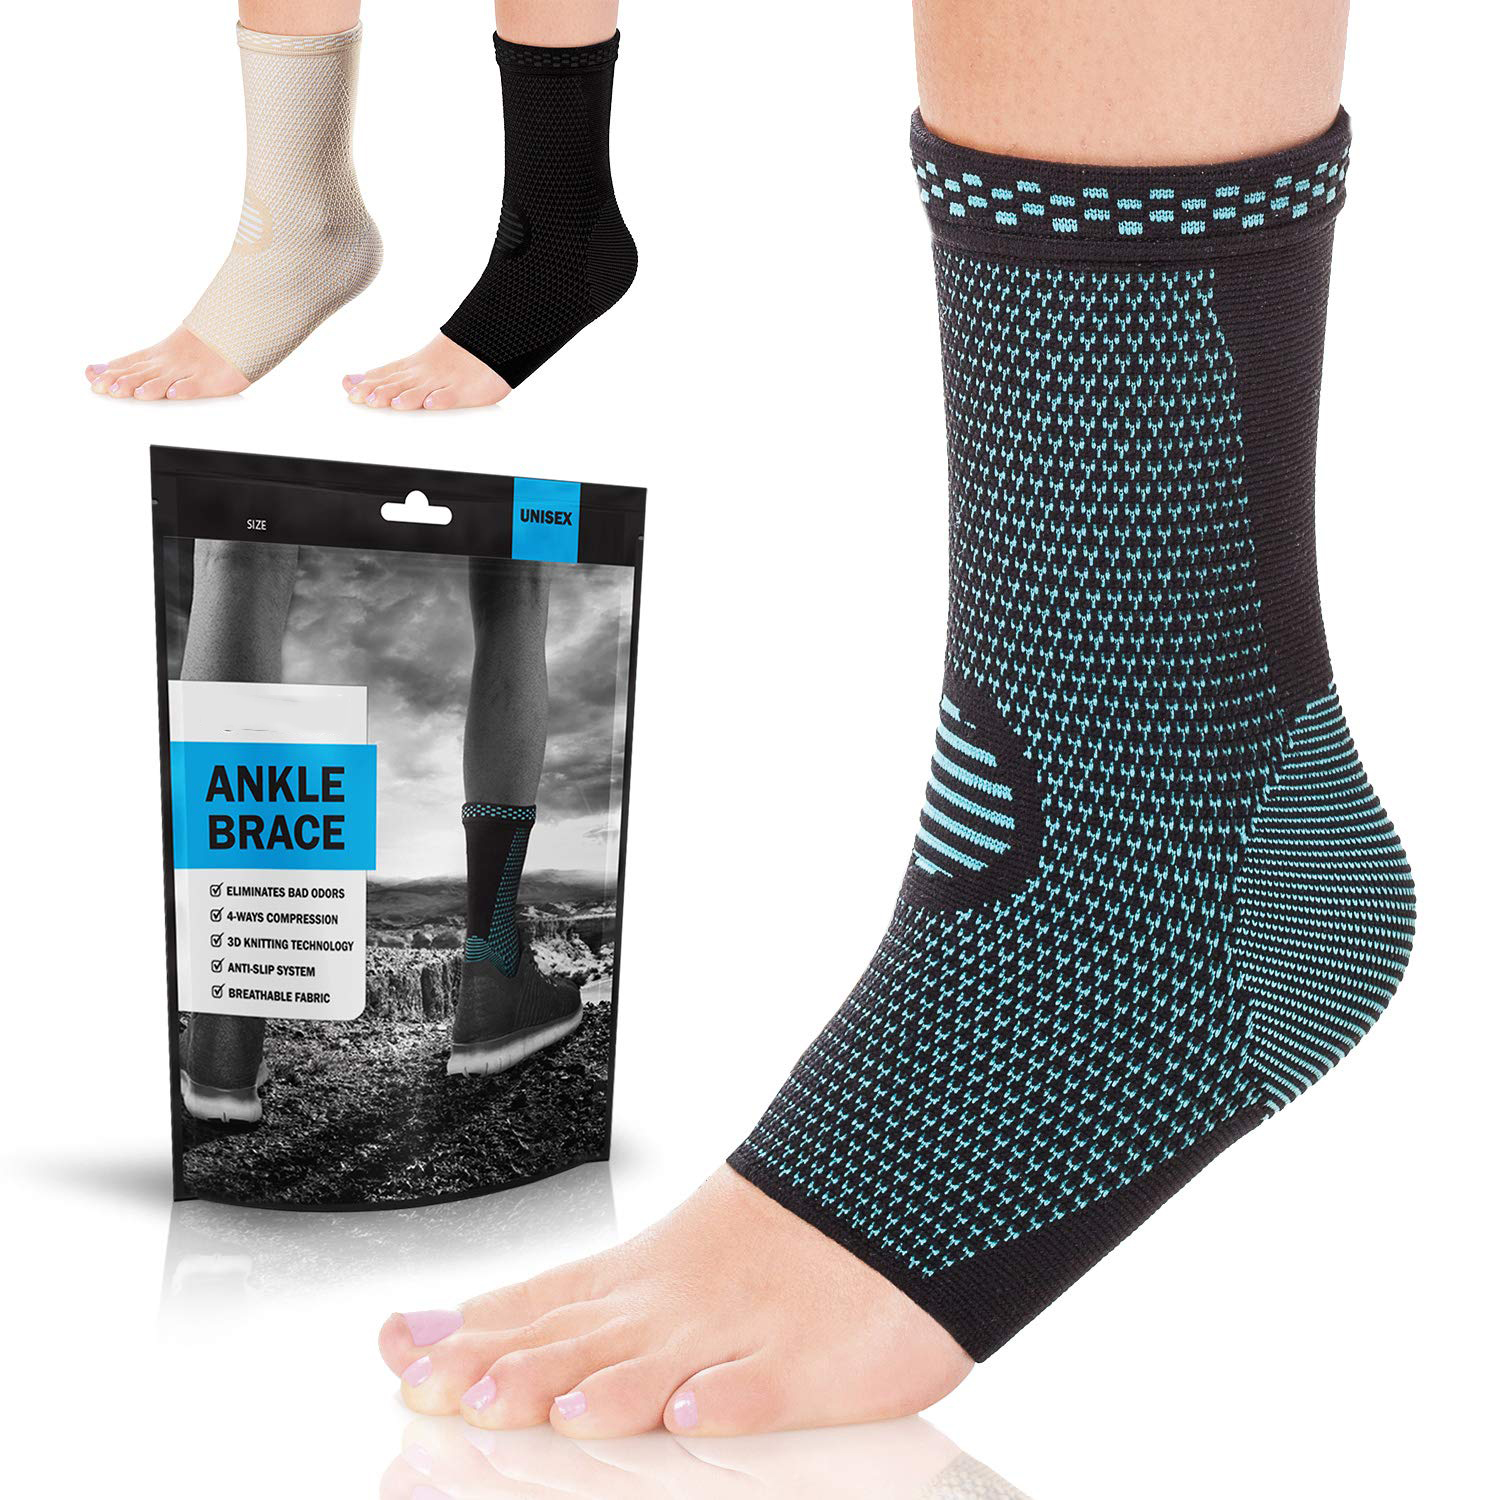 Wholesale Basketball Ankle Sleeve - Ankle Brace Compression Support Sleeve (Pair) for Injury Recovery, Joint Pain and More. Achilles Tendon Support, Plantar Fasciitis Foot Socks with Arch Support,...